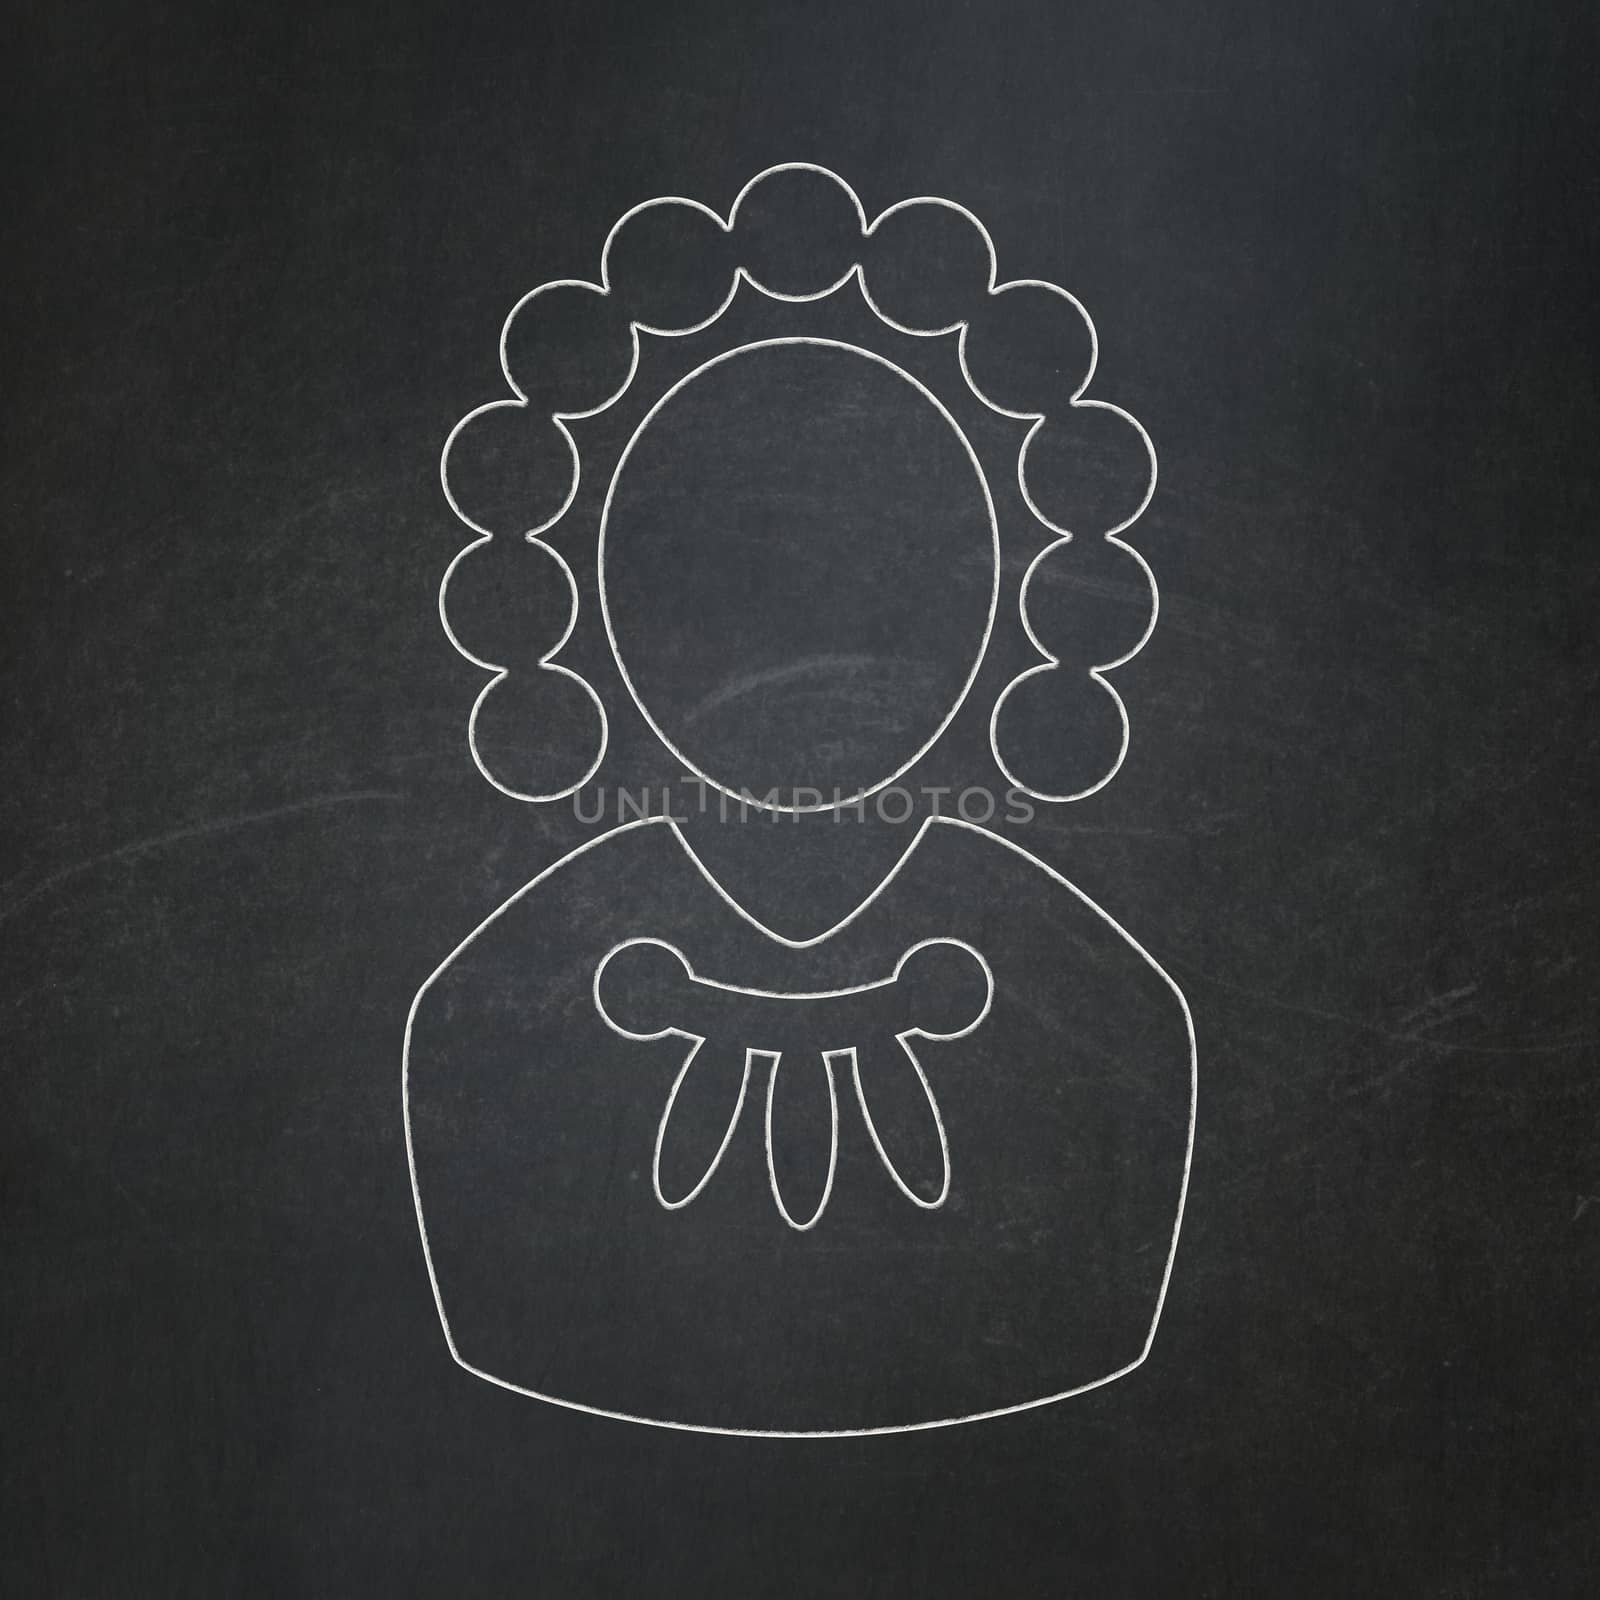 Law concept: Judge icon on Black chalkboard background